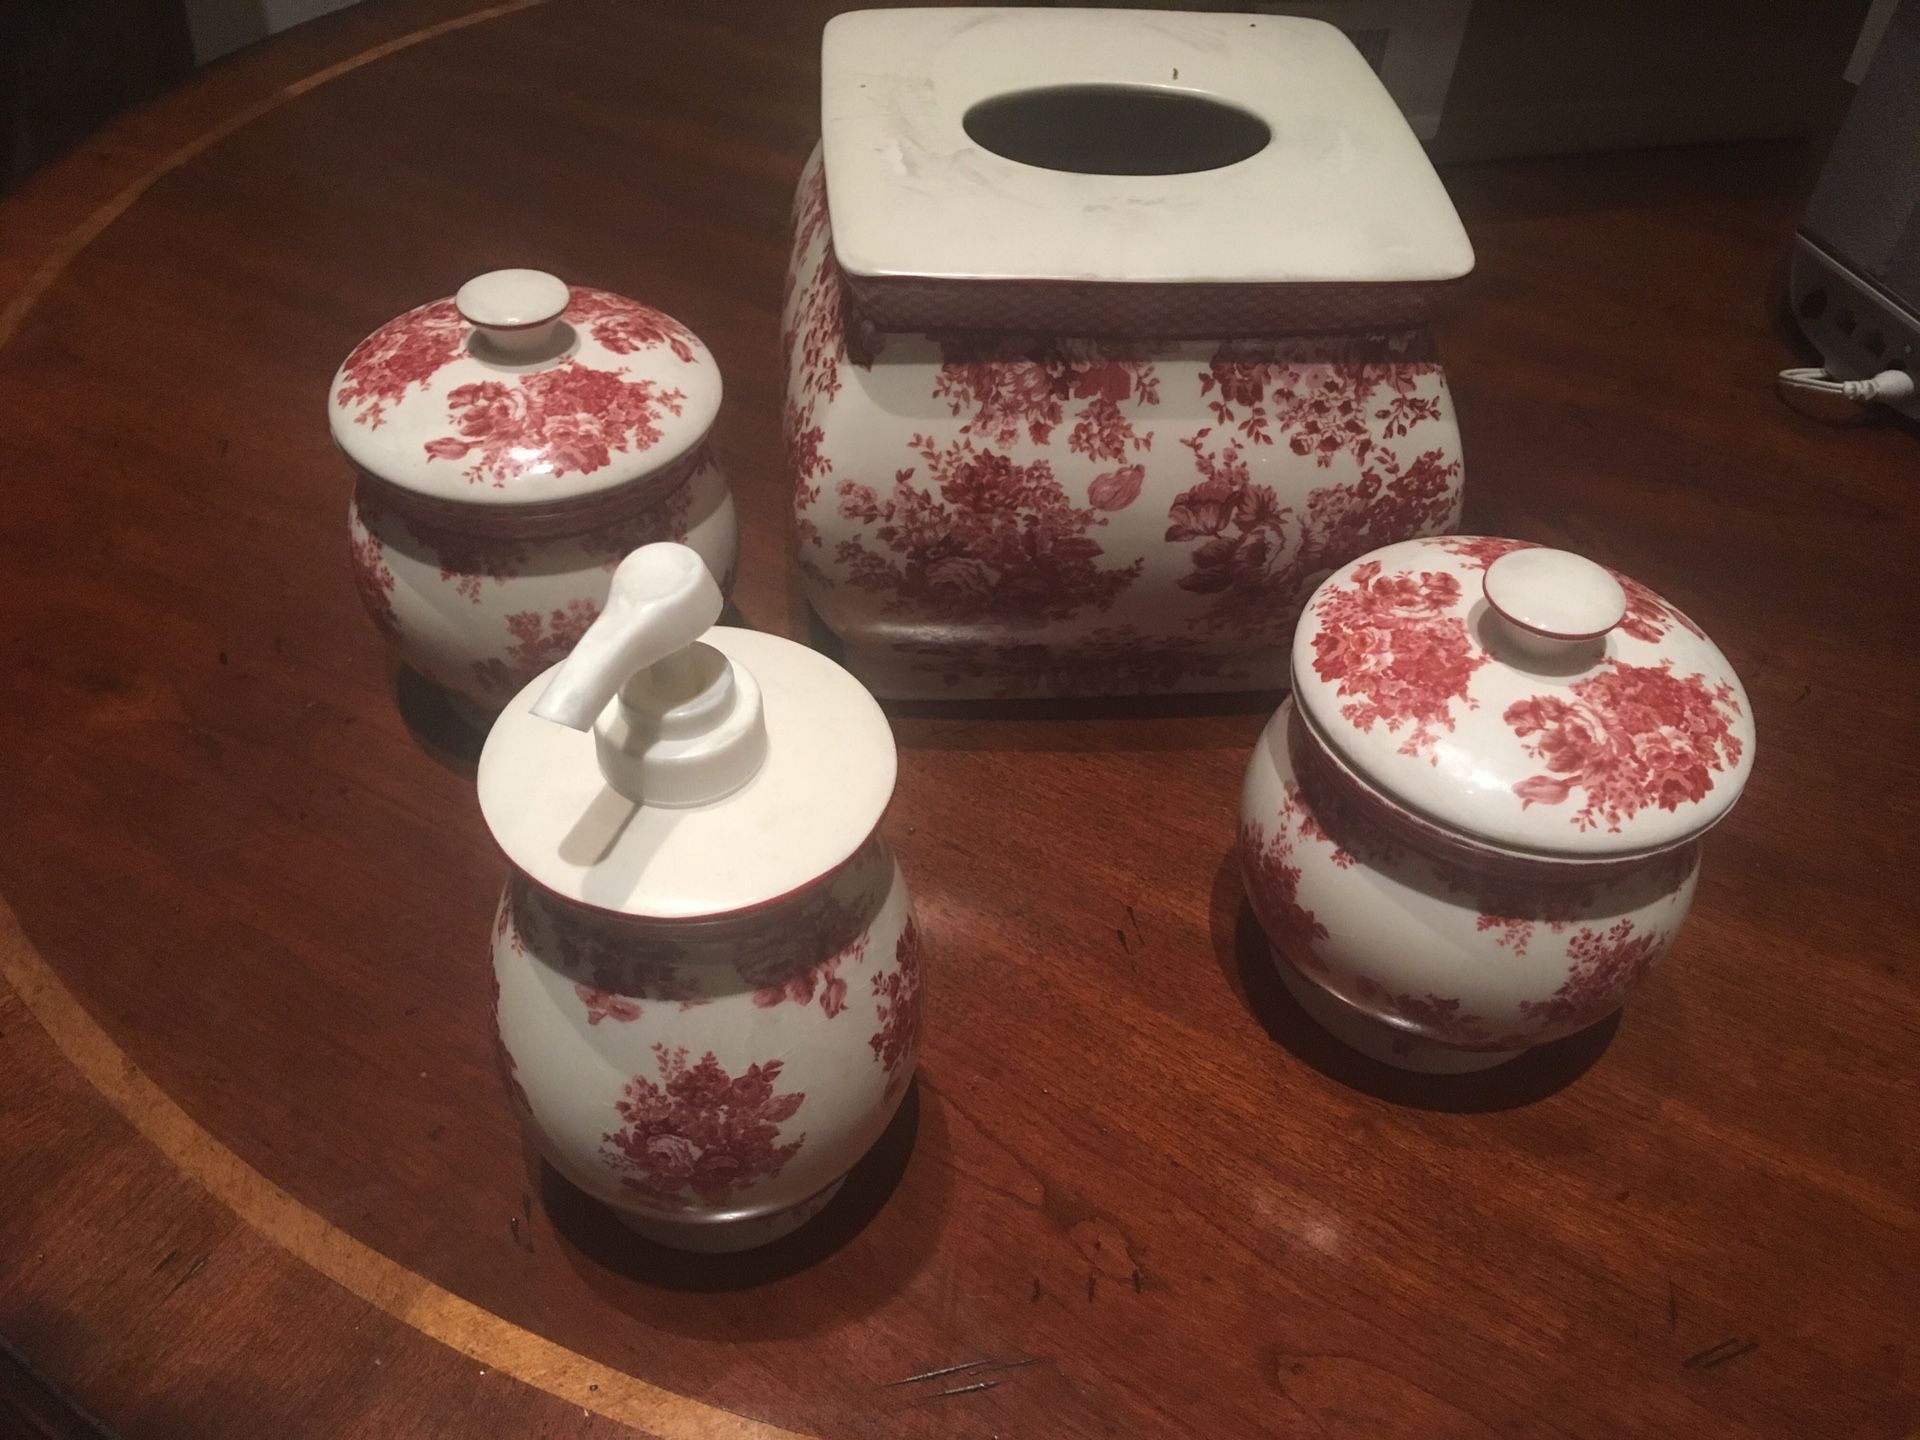 Bathroom accessories - red and white